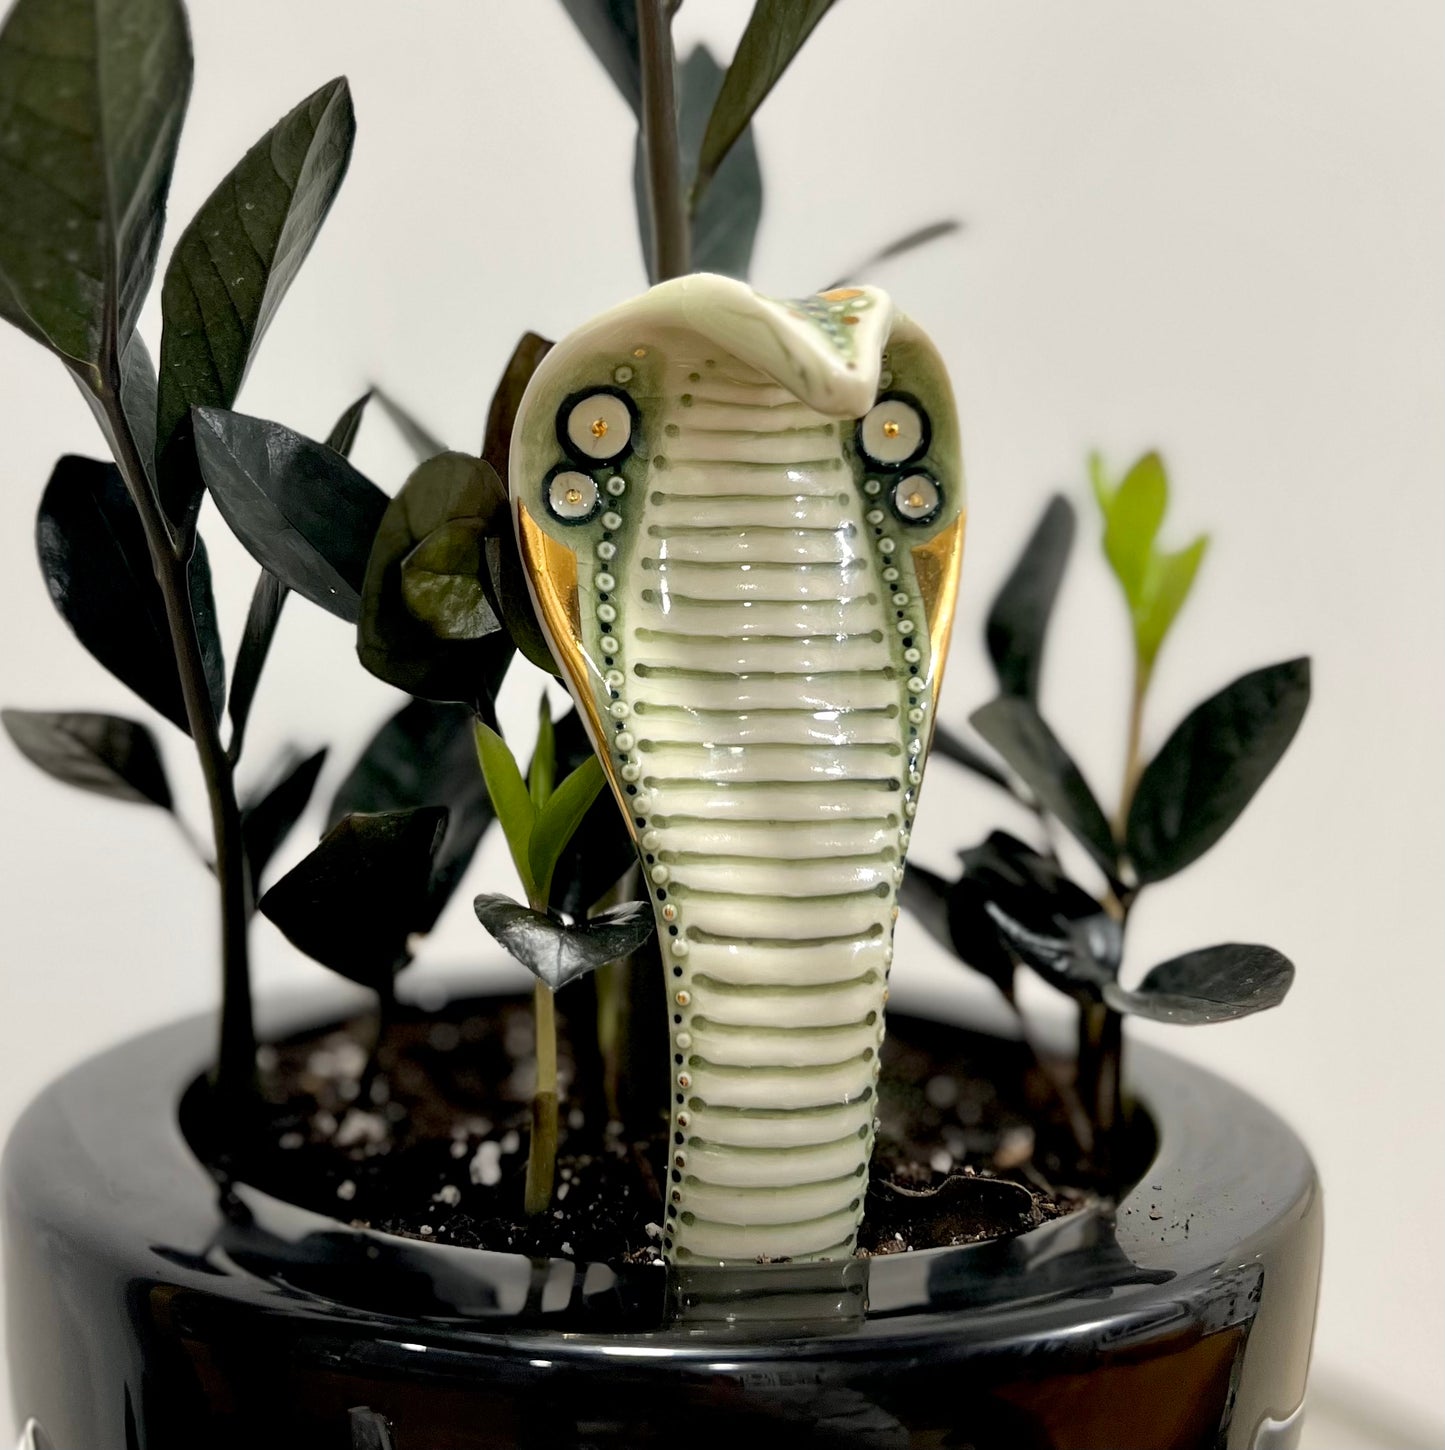 Product Image: Planter Snake 1 - Hand crafted Porcelain Home Ornament. Snake with Brass Rod for placing in pots with plants.